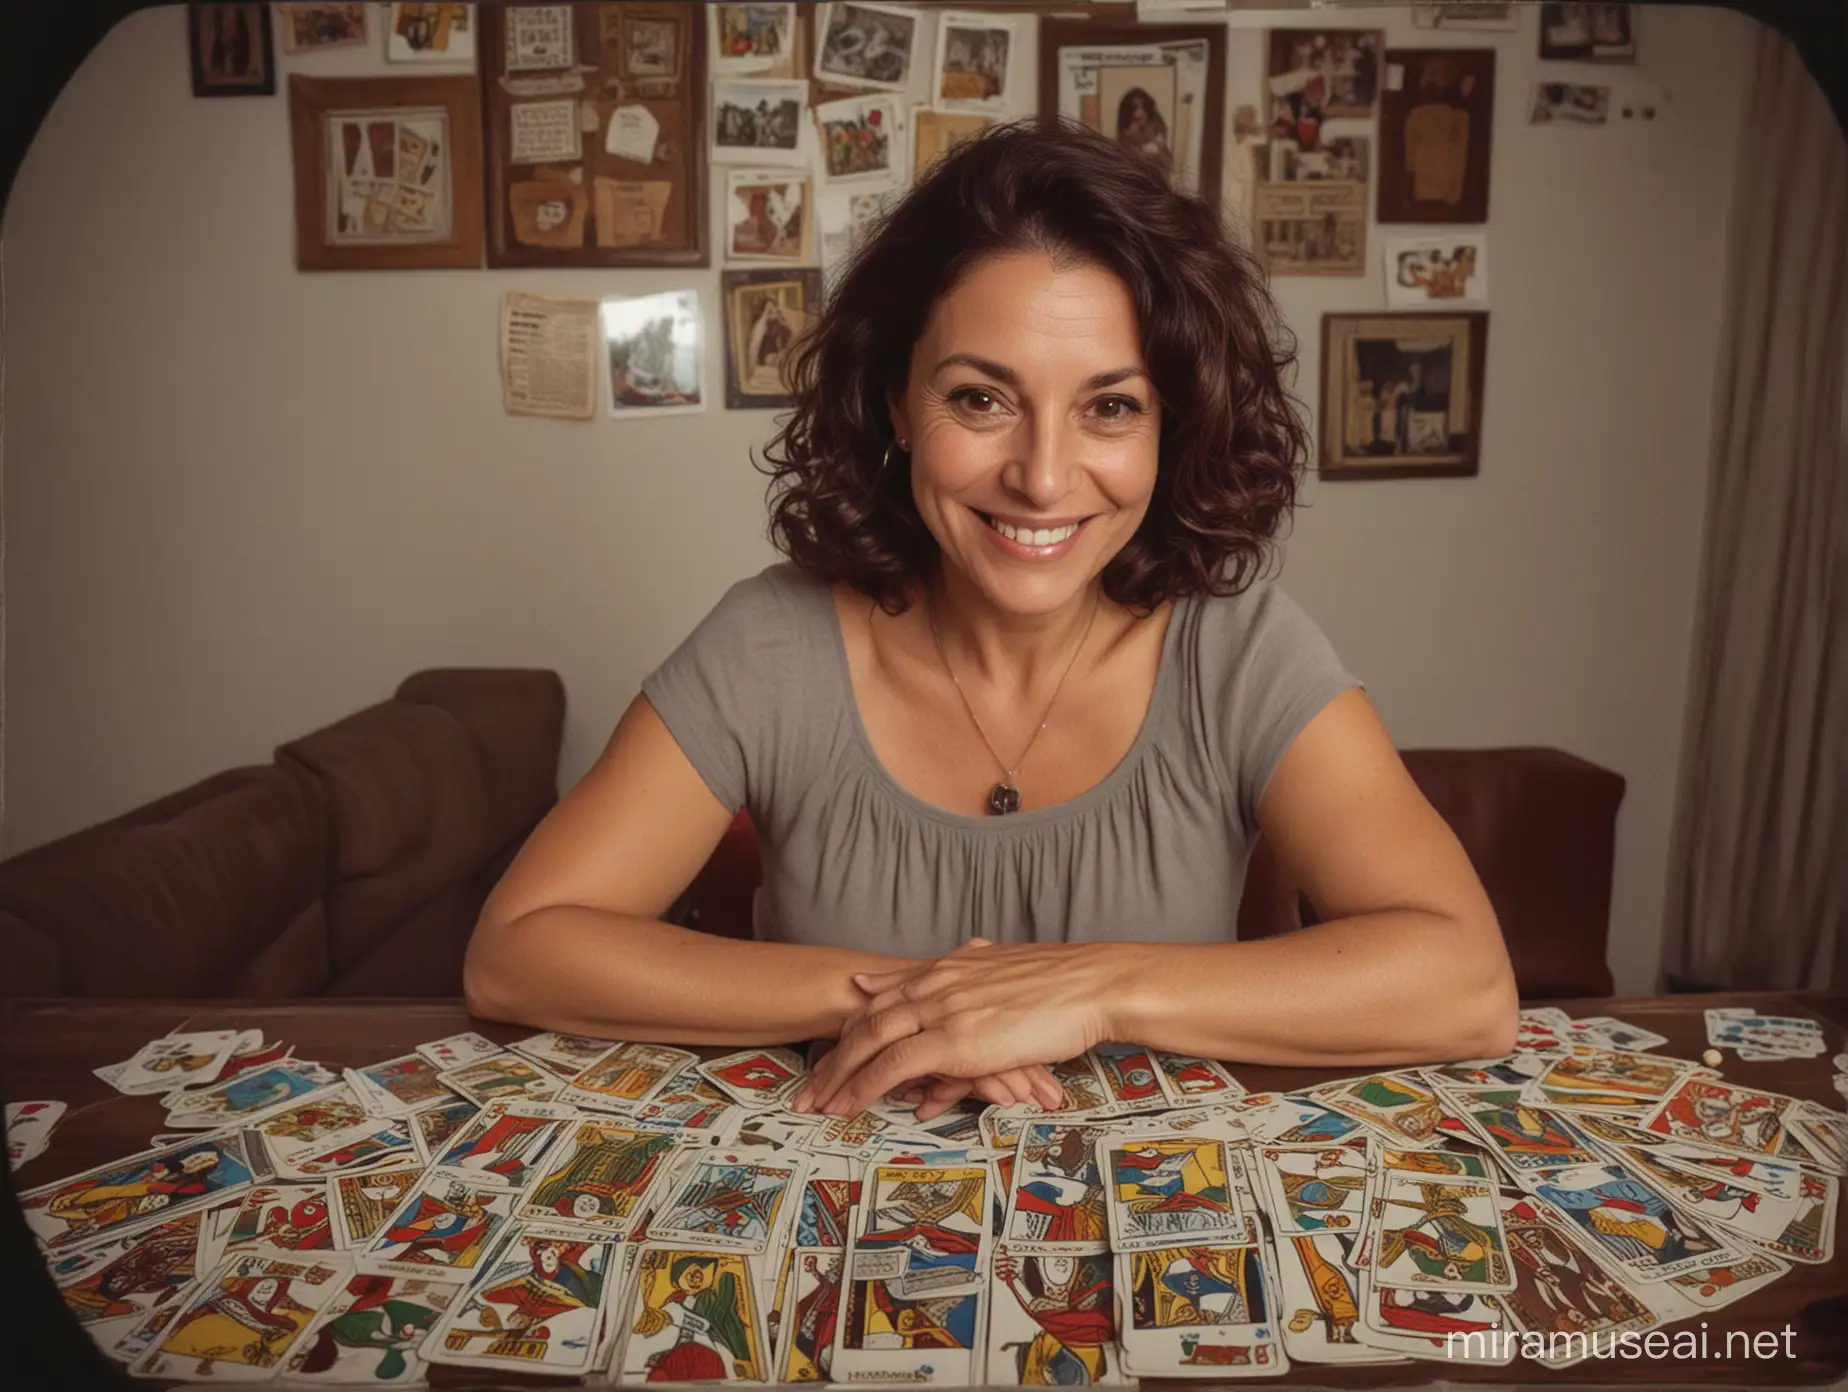 Middleaged Brazilian Woman Smiling While Playing Tarot Cards